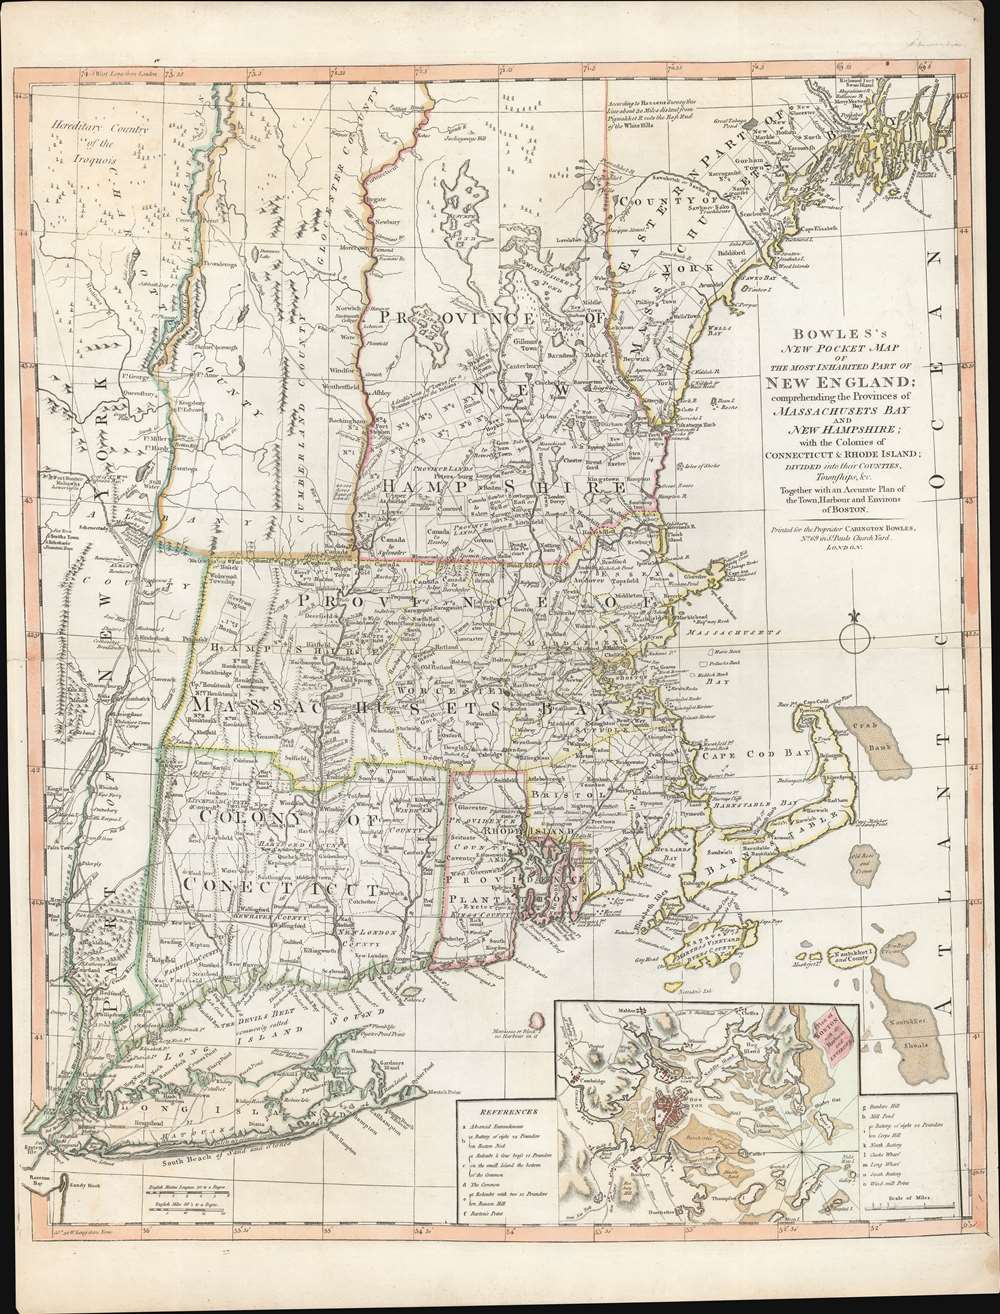 Bowles's New Pocket Map of the Most Inhabited Part of New England; comprehending the Provinces of Massachusets Bay and New Hampshire; with the Colonies of Connecticut and Rhode Island; Divided into their Counties, Townships, and c. Together with an Accurate Plan of The Town, Harbour and Environs of Boston. - Main View